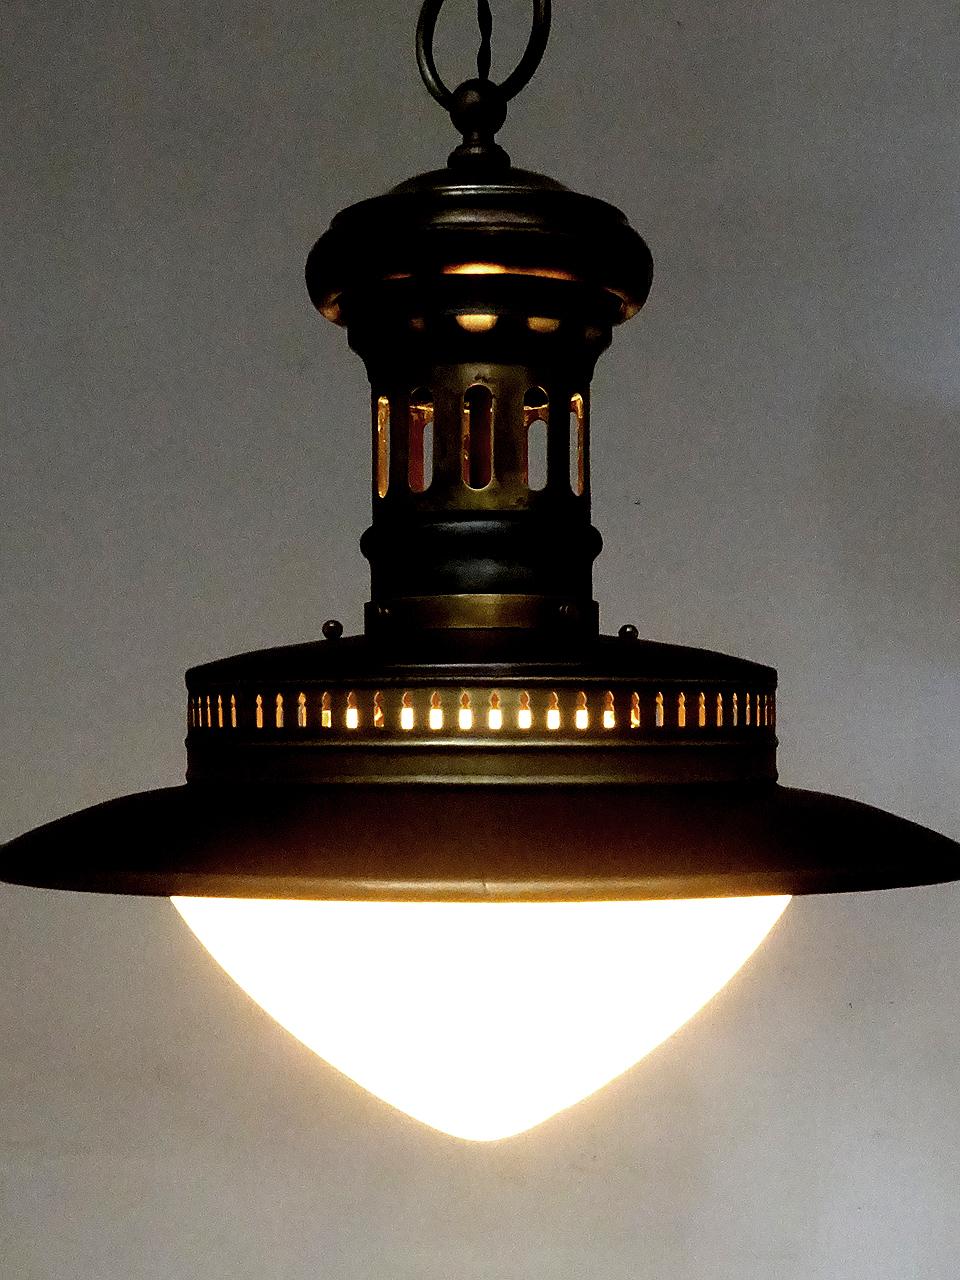 This is an interesting gas lamp with a unique wide shape. Its constructed with a combination of galvanized steel and brass showing nice subtle color changes. The large acorn shade is white milk glass and gives a nice even glow. There are decorative